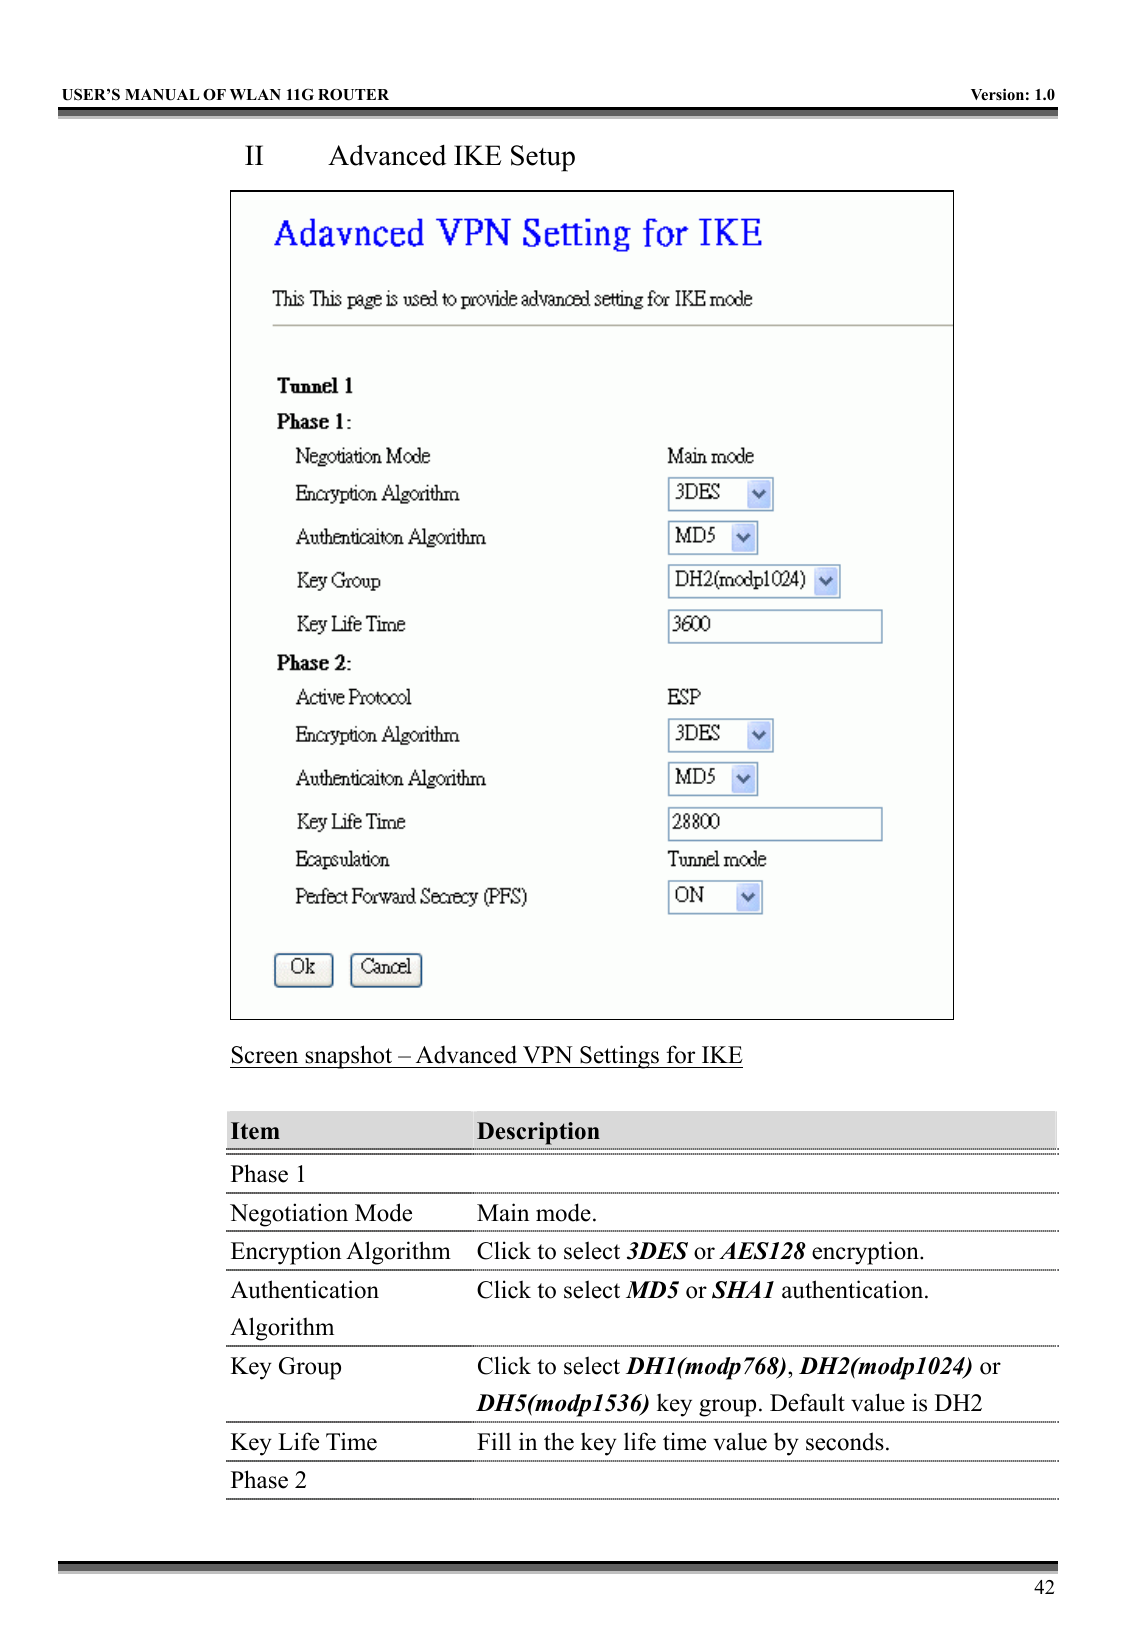   USER’S MANUAL OF WLAN 11G ROUTER    Version: 1.0     42 II    Advanced IKE Setup  Screen snapshot – Advanced VPN Settings for IKE  Item  Description   Phase 1   Negotiation Mode  Main mode. Encryption Algorithm  Click to select 3DES or AES128 encryption. Authentication Algorithm Click to select MD5 or SHA1 authentication. Key Group  Click to select DH1(modp768), DH2(modp1024) or DH5(modp1536) key group. Default value is DH2 Key Life Time  Fill in the key life time value by seconds. Phase 2   